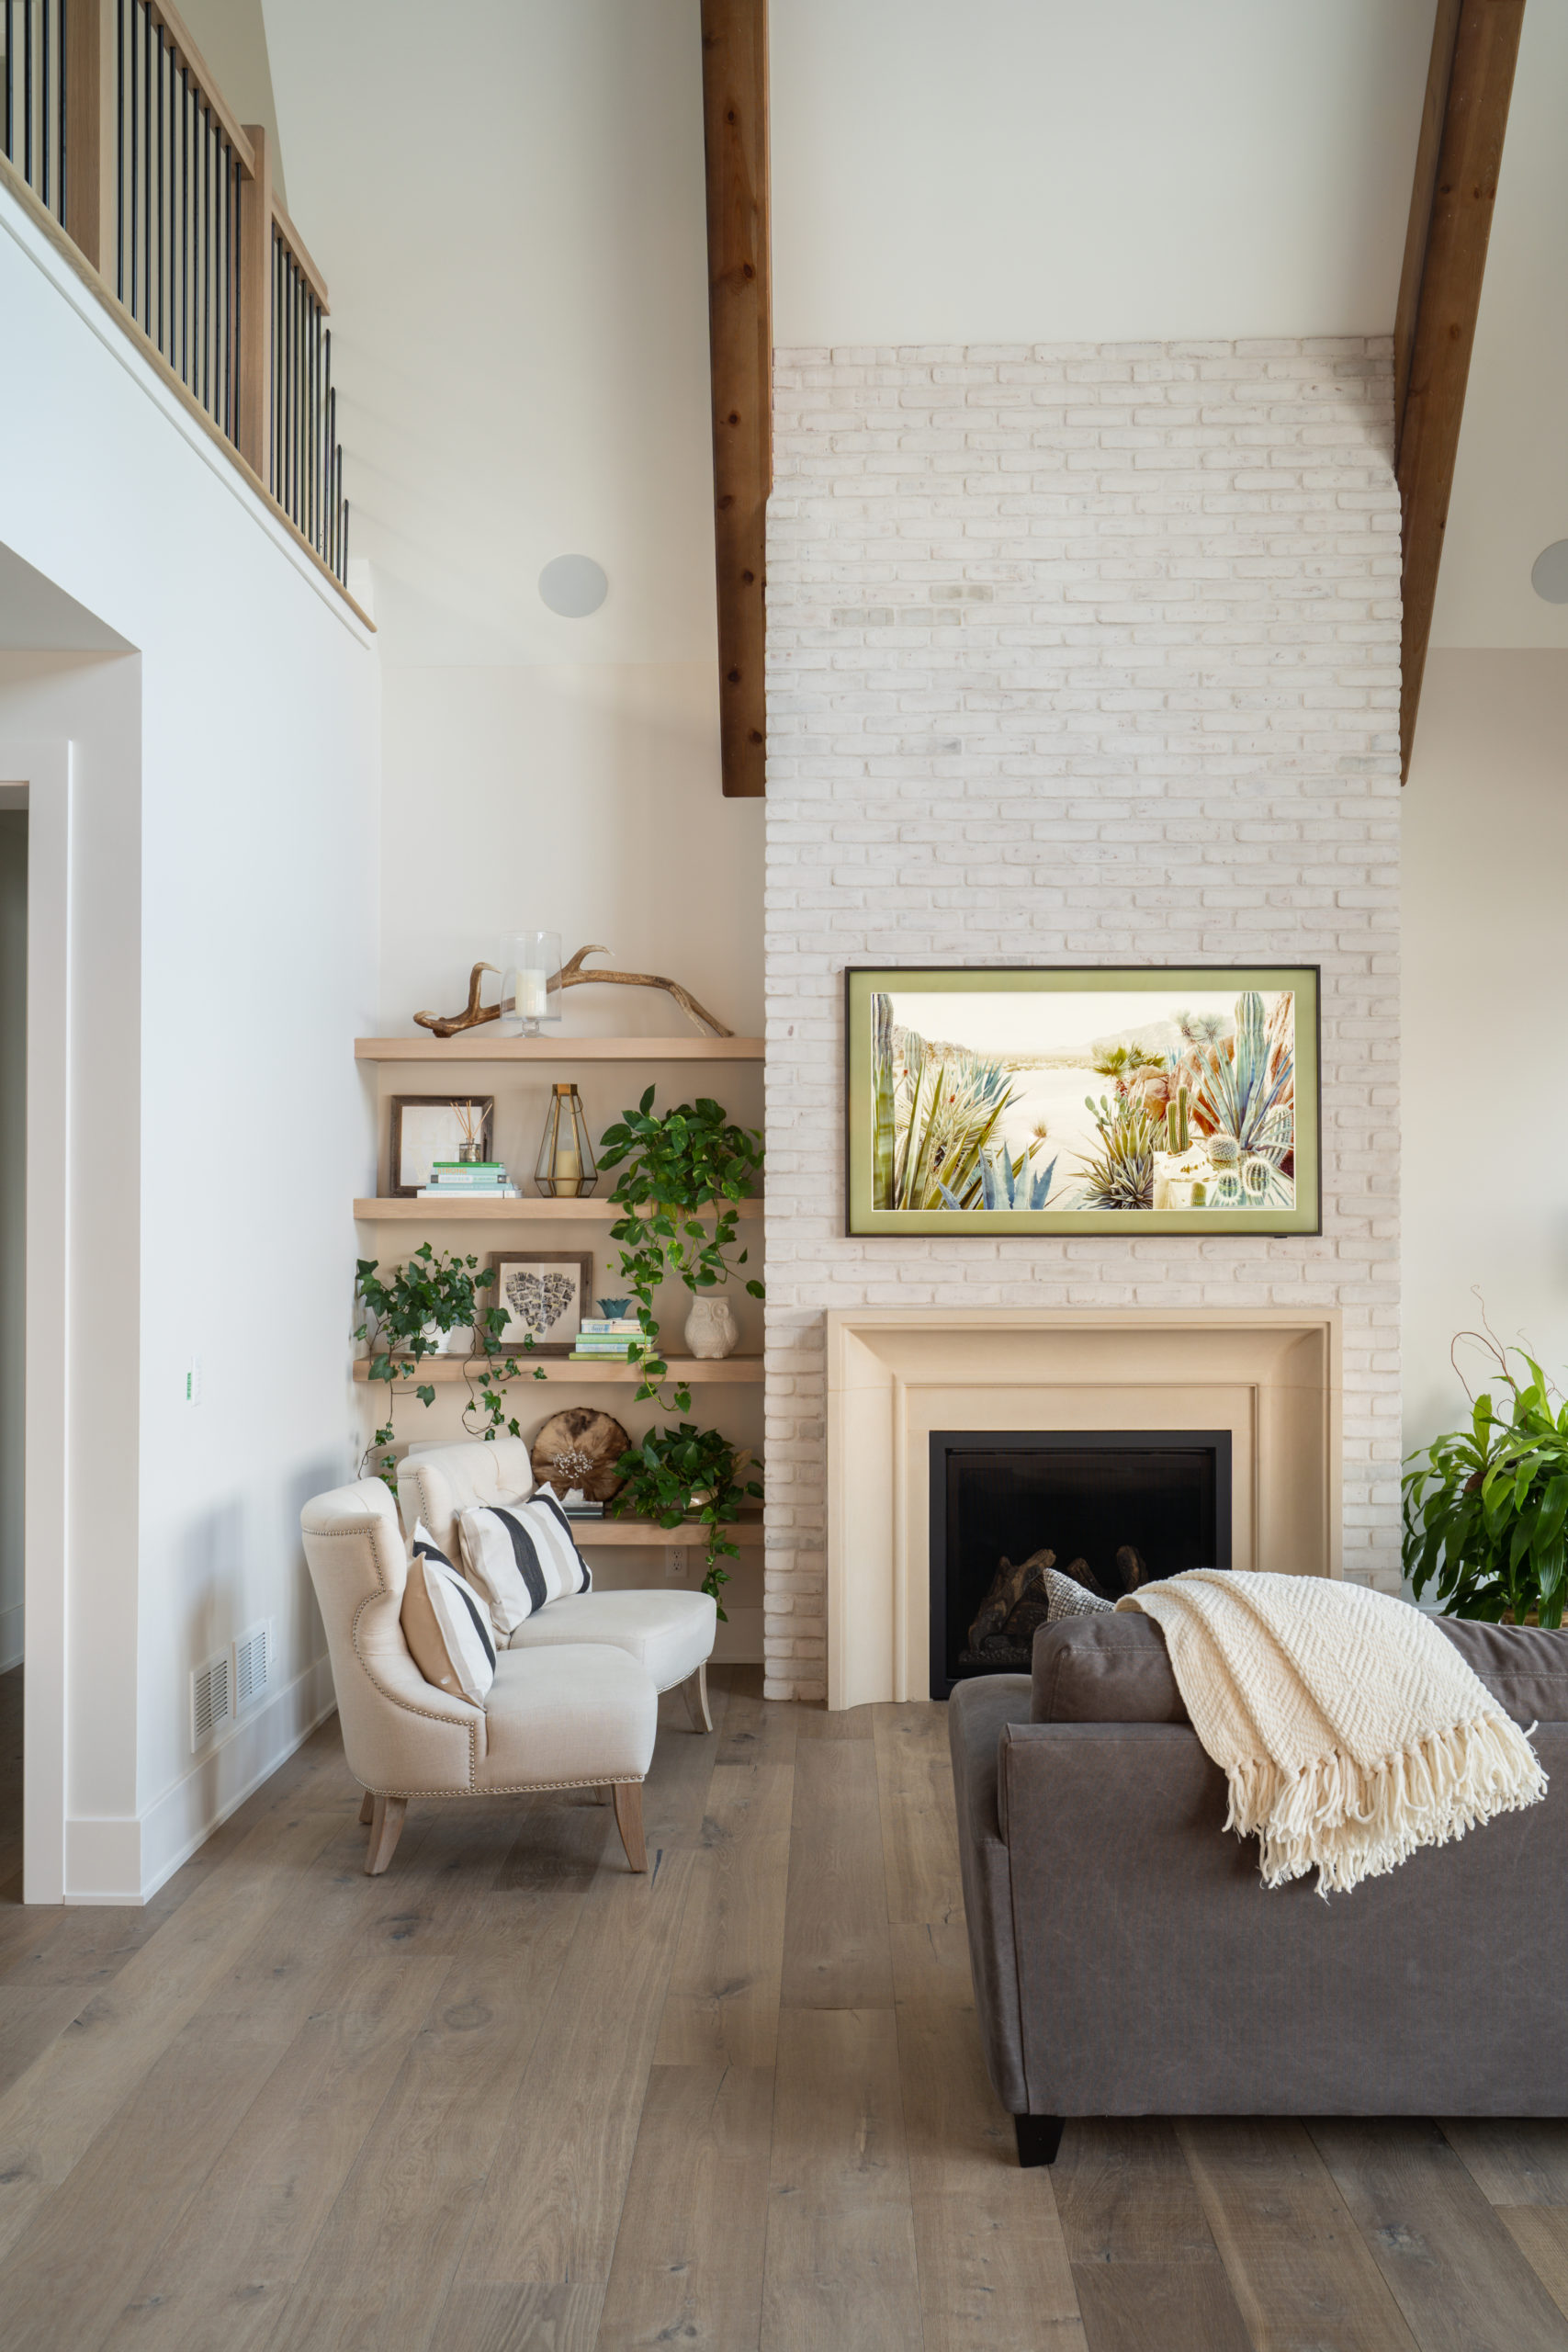 The Lake Escape custom home remodel includes a cozy living room with a fireplace.